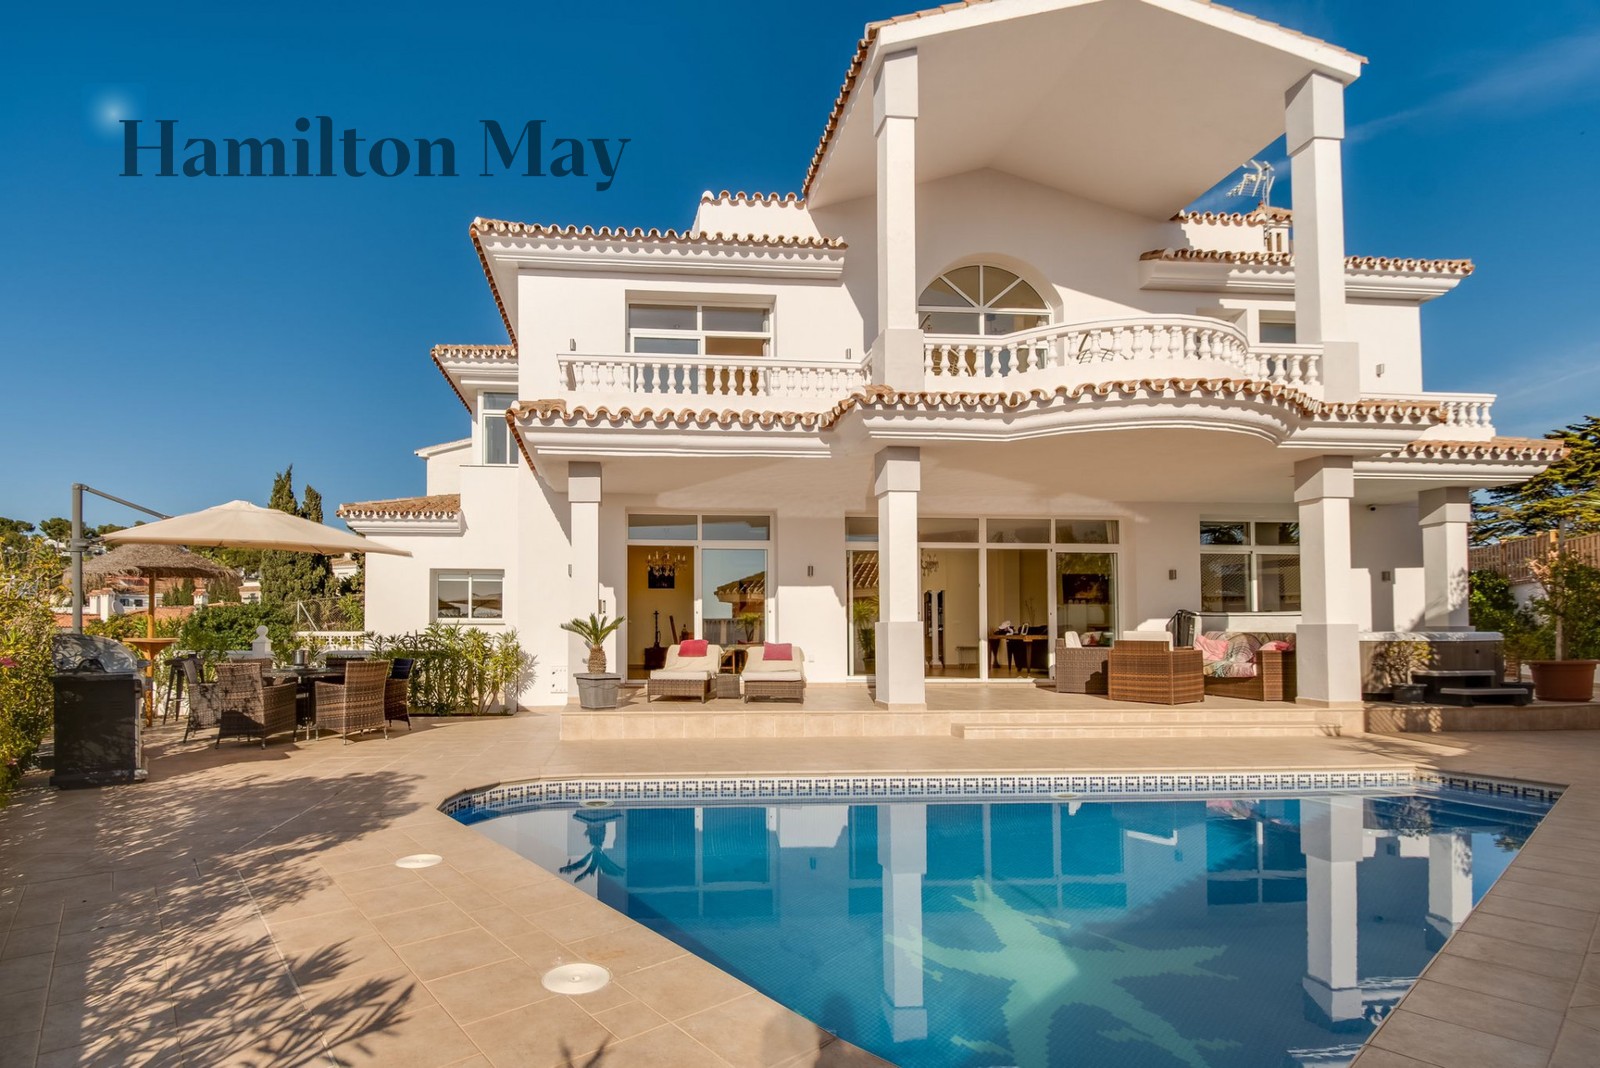 Villa with four bedrooms, Riviera del Sol - 10 min. walk from the beach